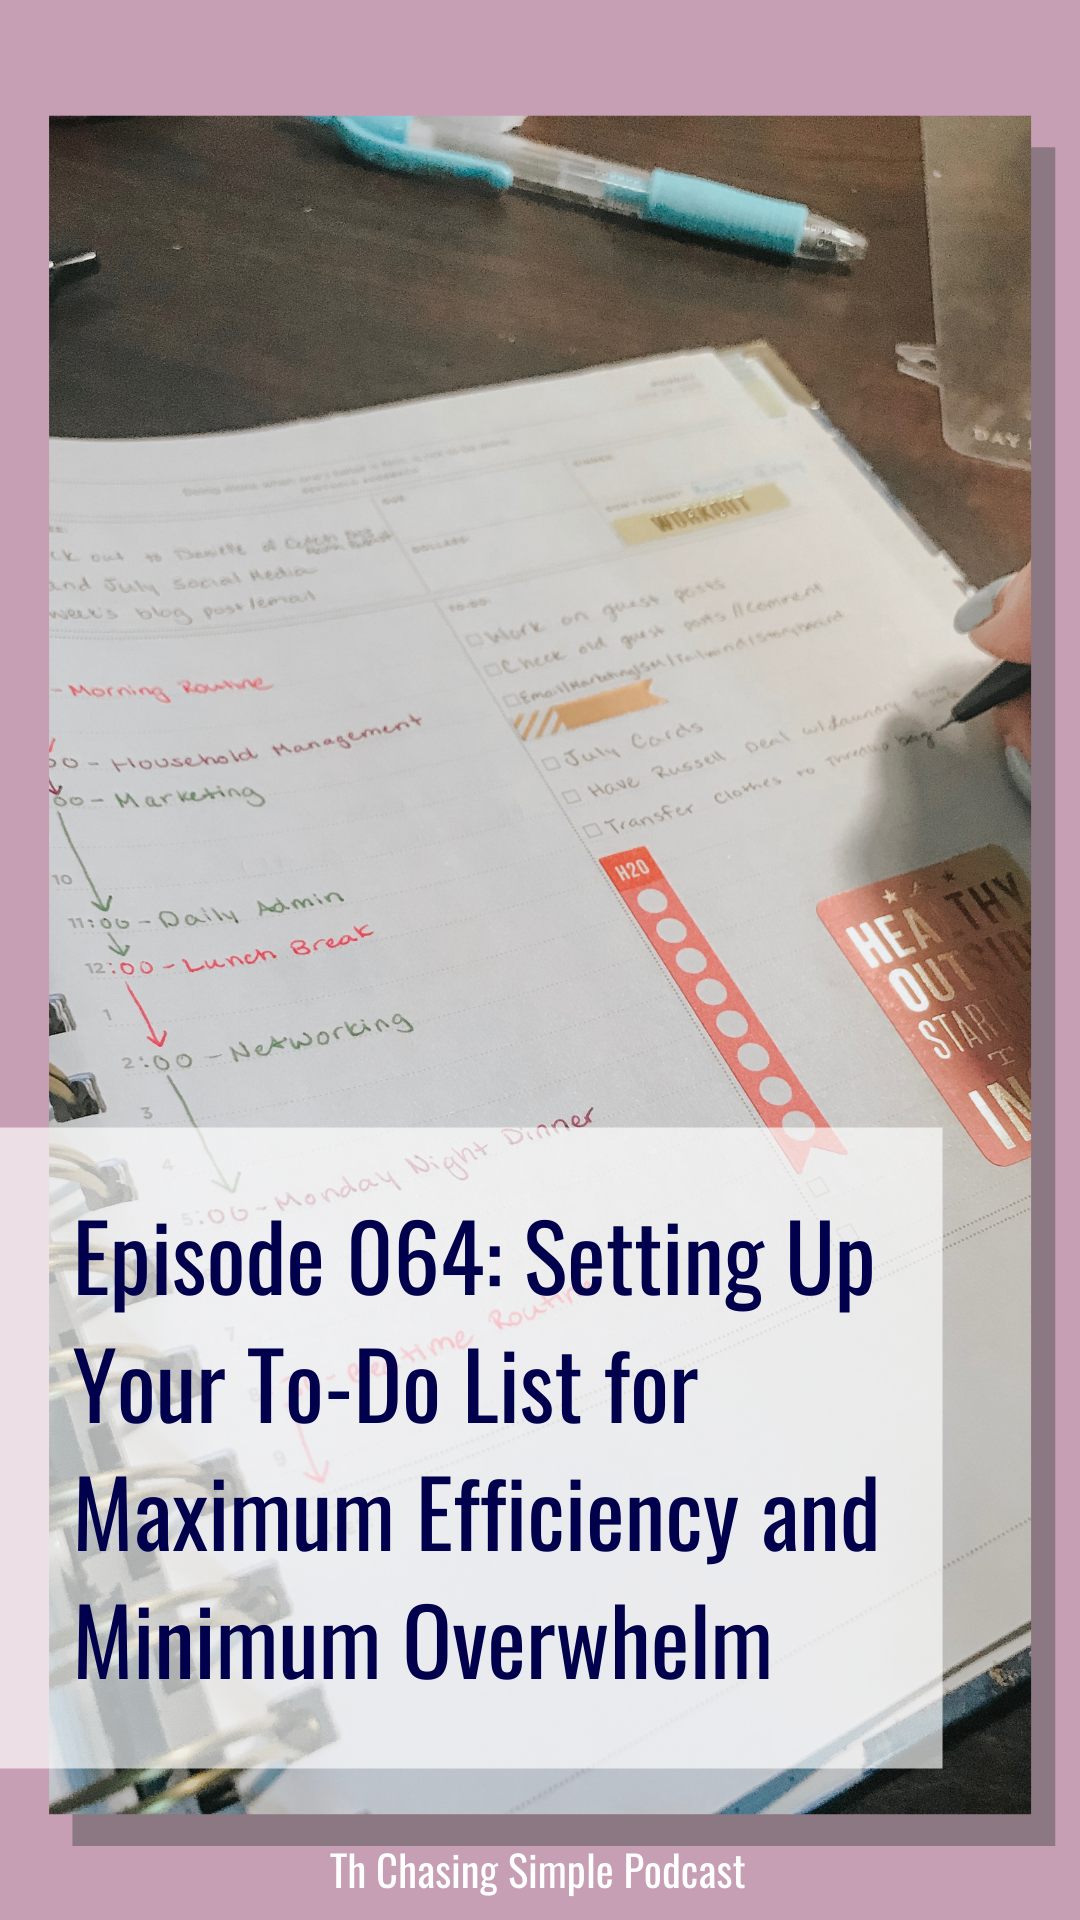 A to-do list is an important part of keeping yourself organized, but most people use one in a way that overwhelms instead of helps.